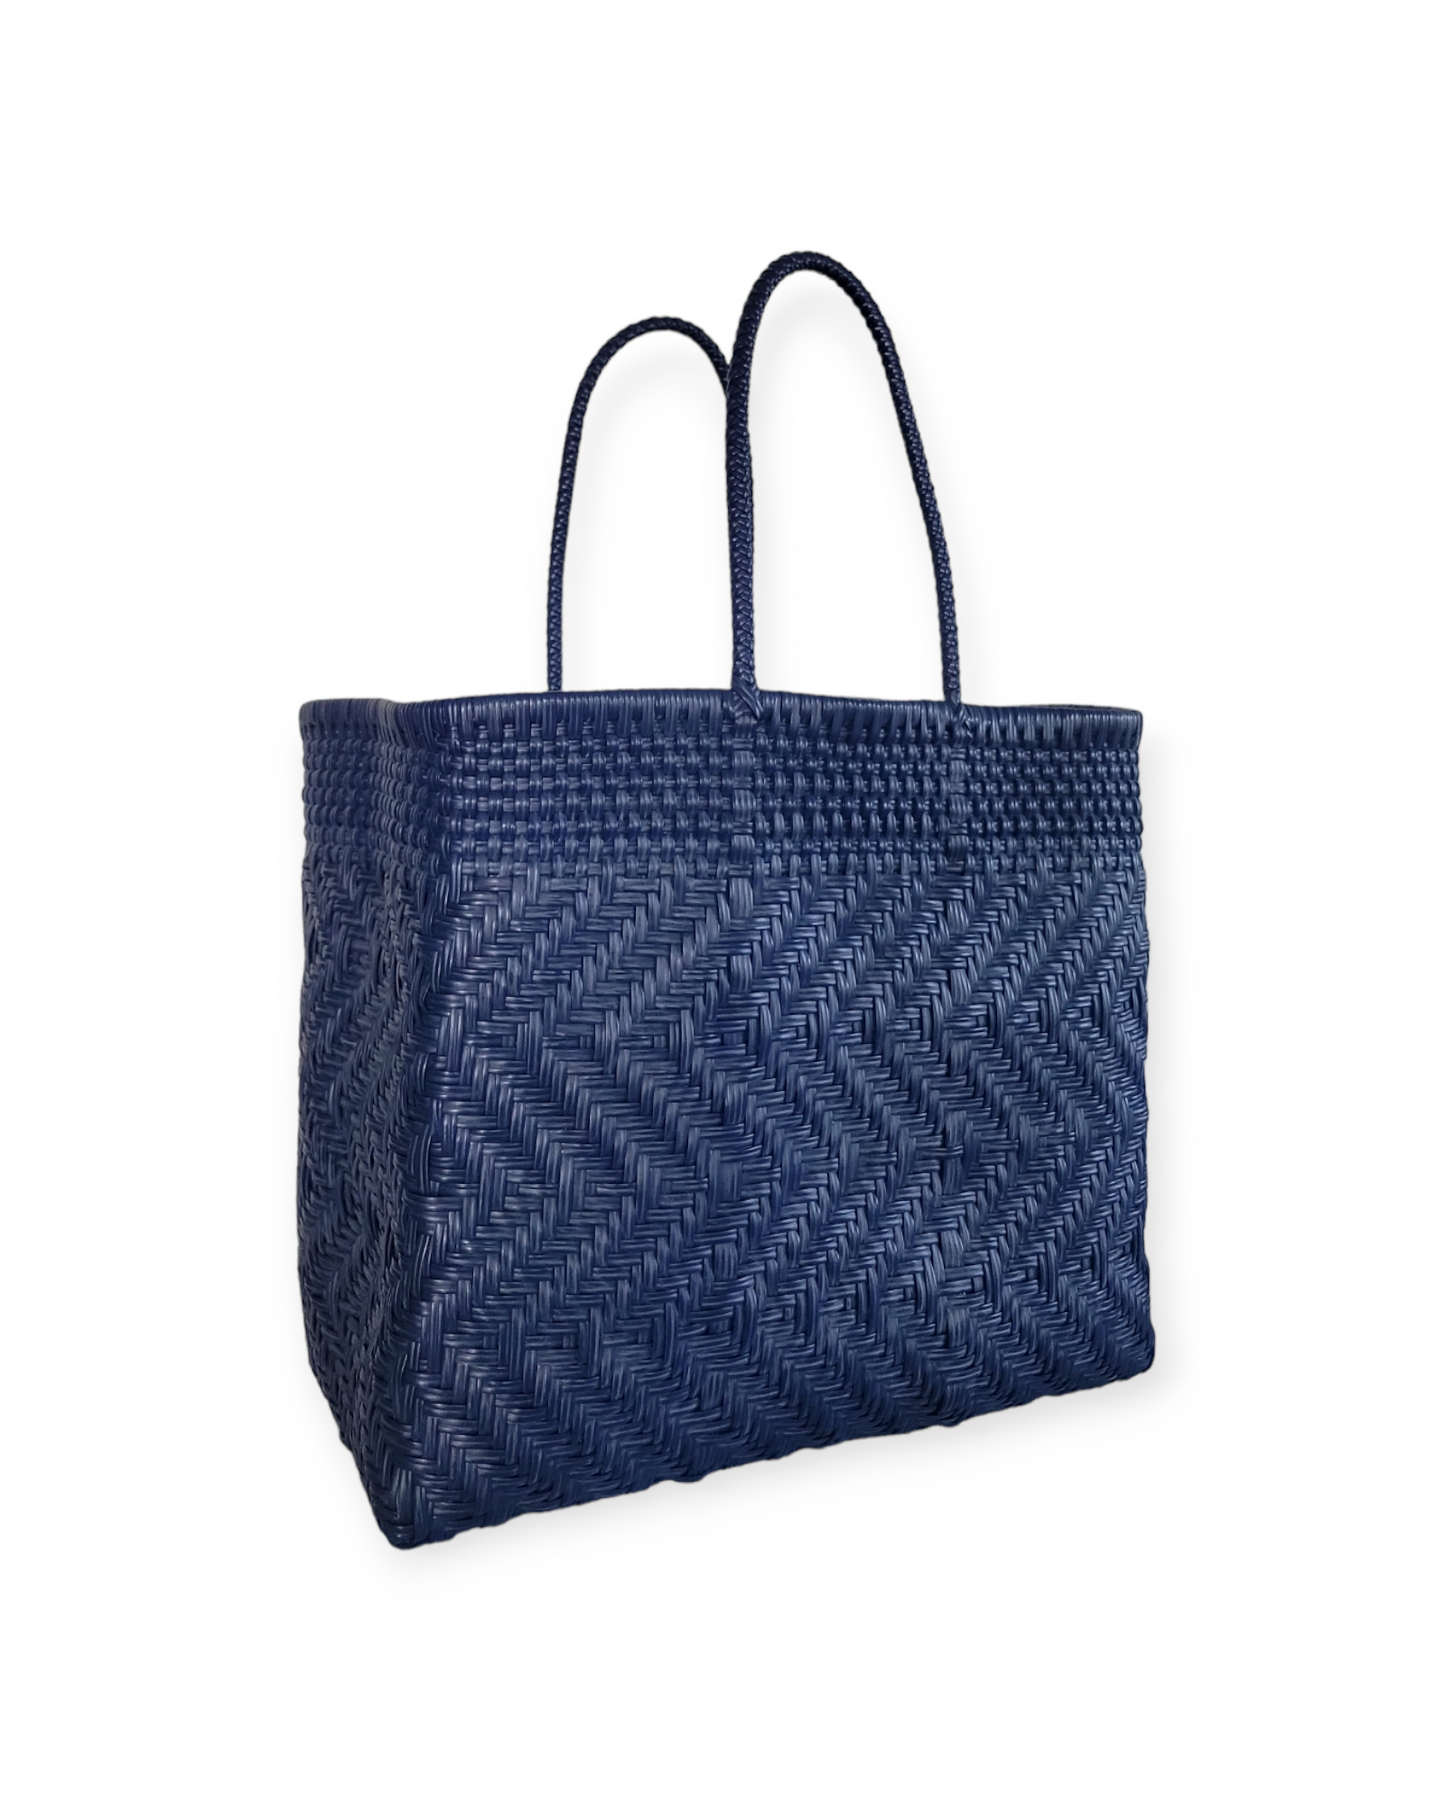 Large Tote | Beach Tote. Handwoven recycled bag.